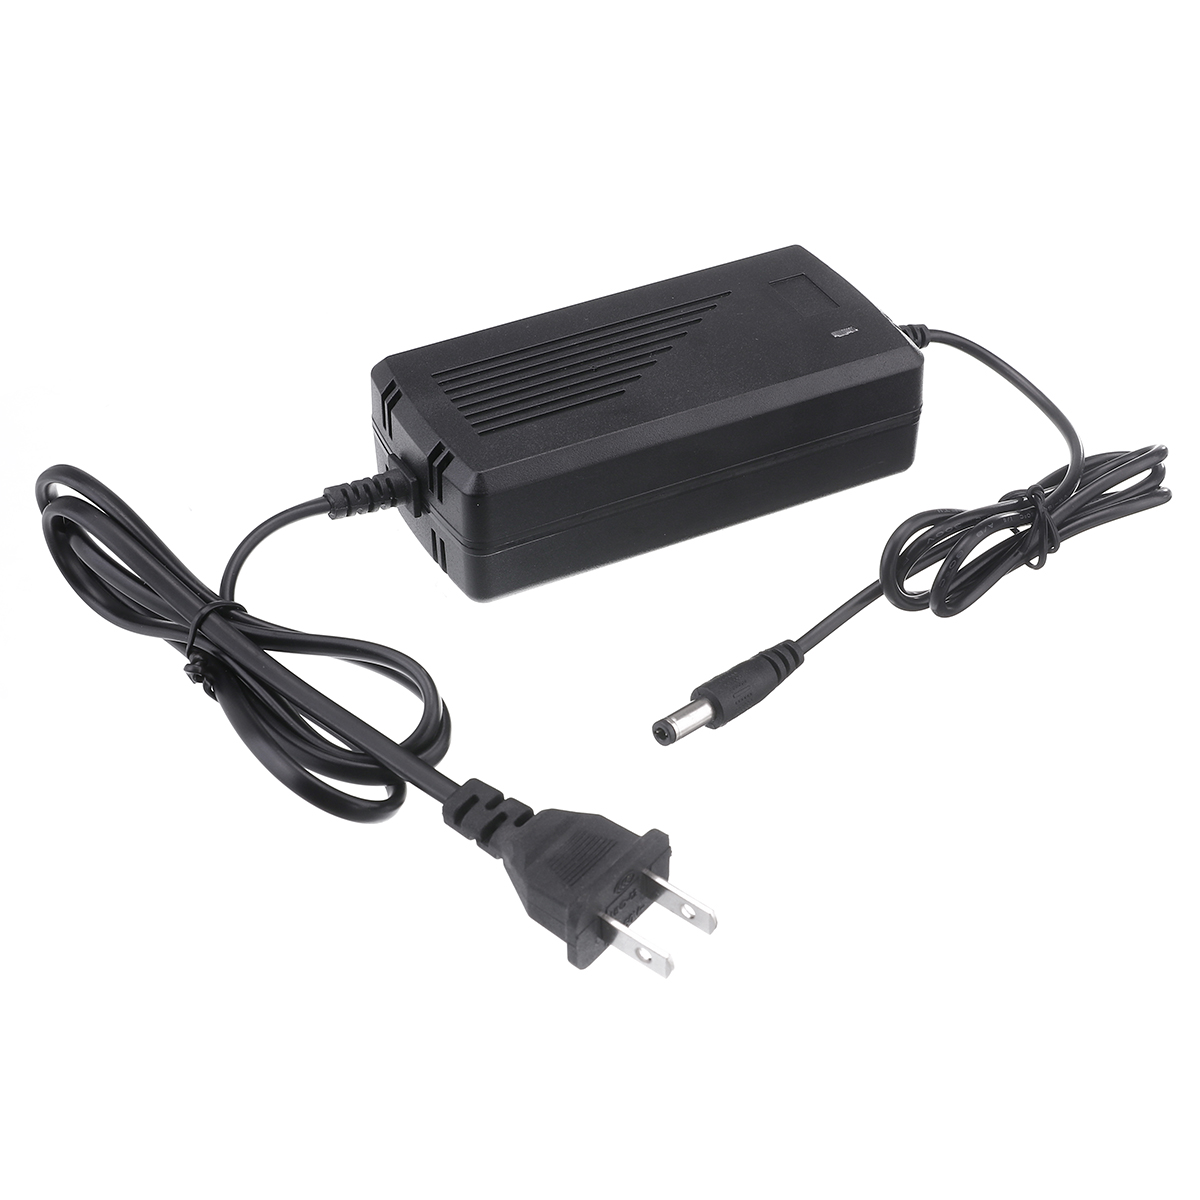 18V--21V-Lithium-Battery-Charger-Supply-DC-80-240V-Switching-Power-Wall-Charger-For-Makita-Battery-1747823-4